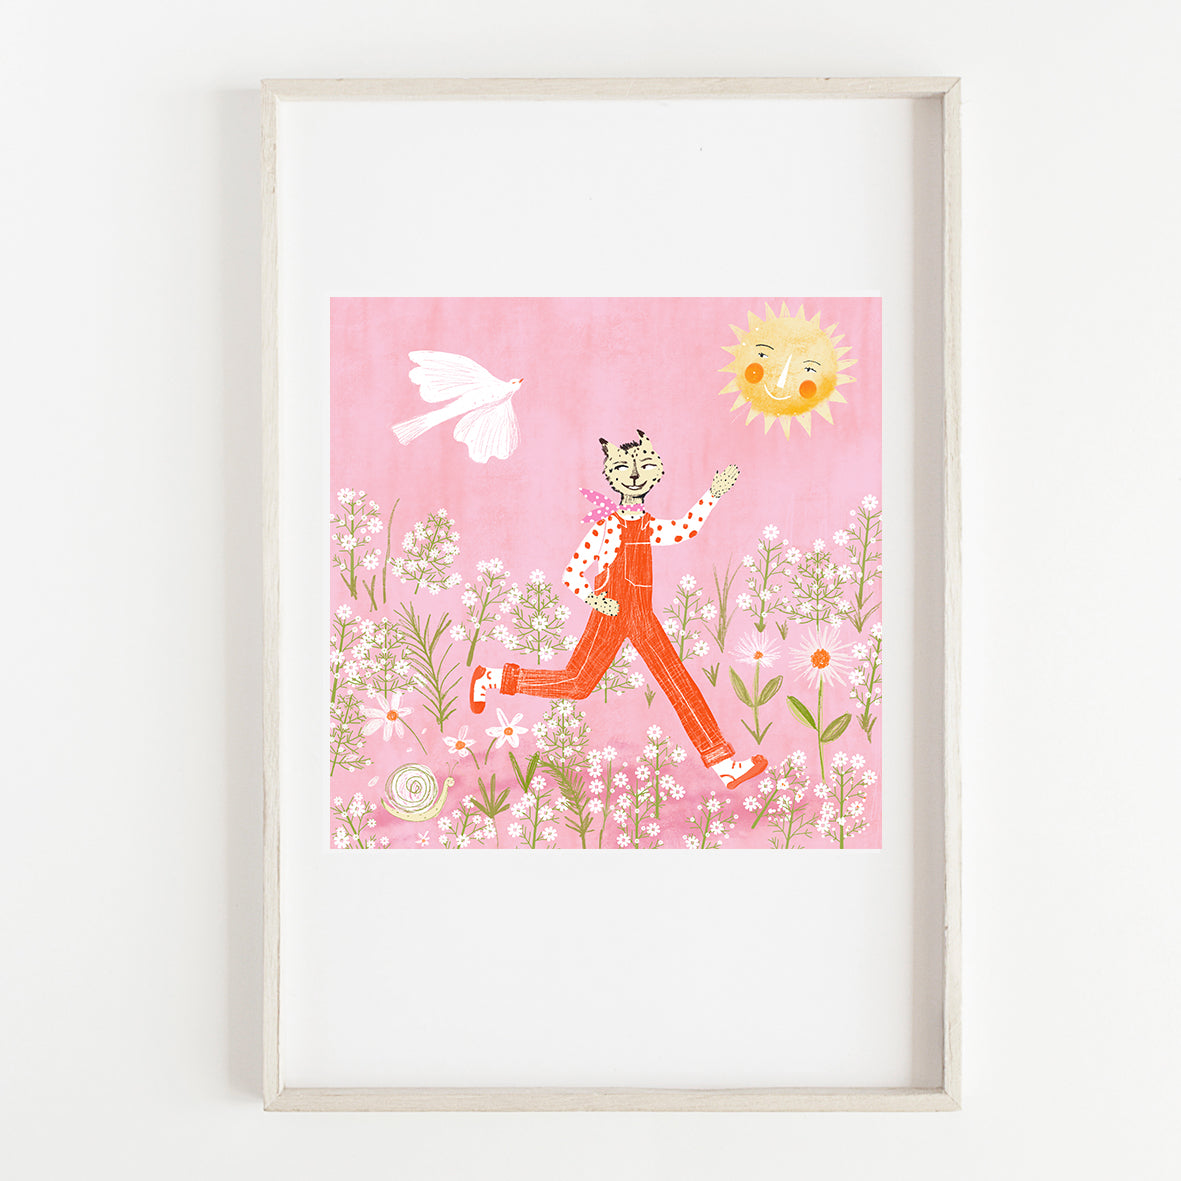 Hello-Spring--art-Print in frame by Susse Linton for Susse Collection-framed